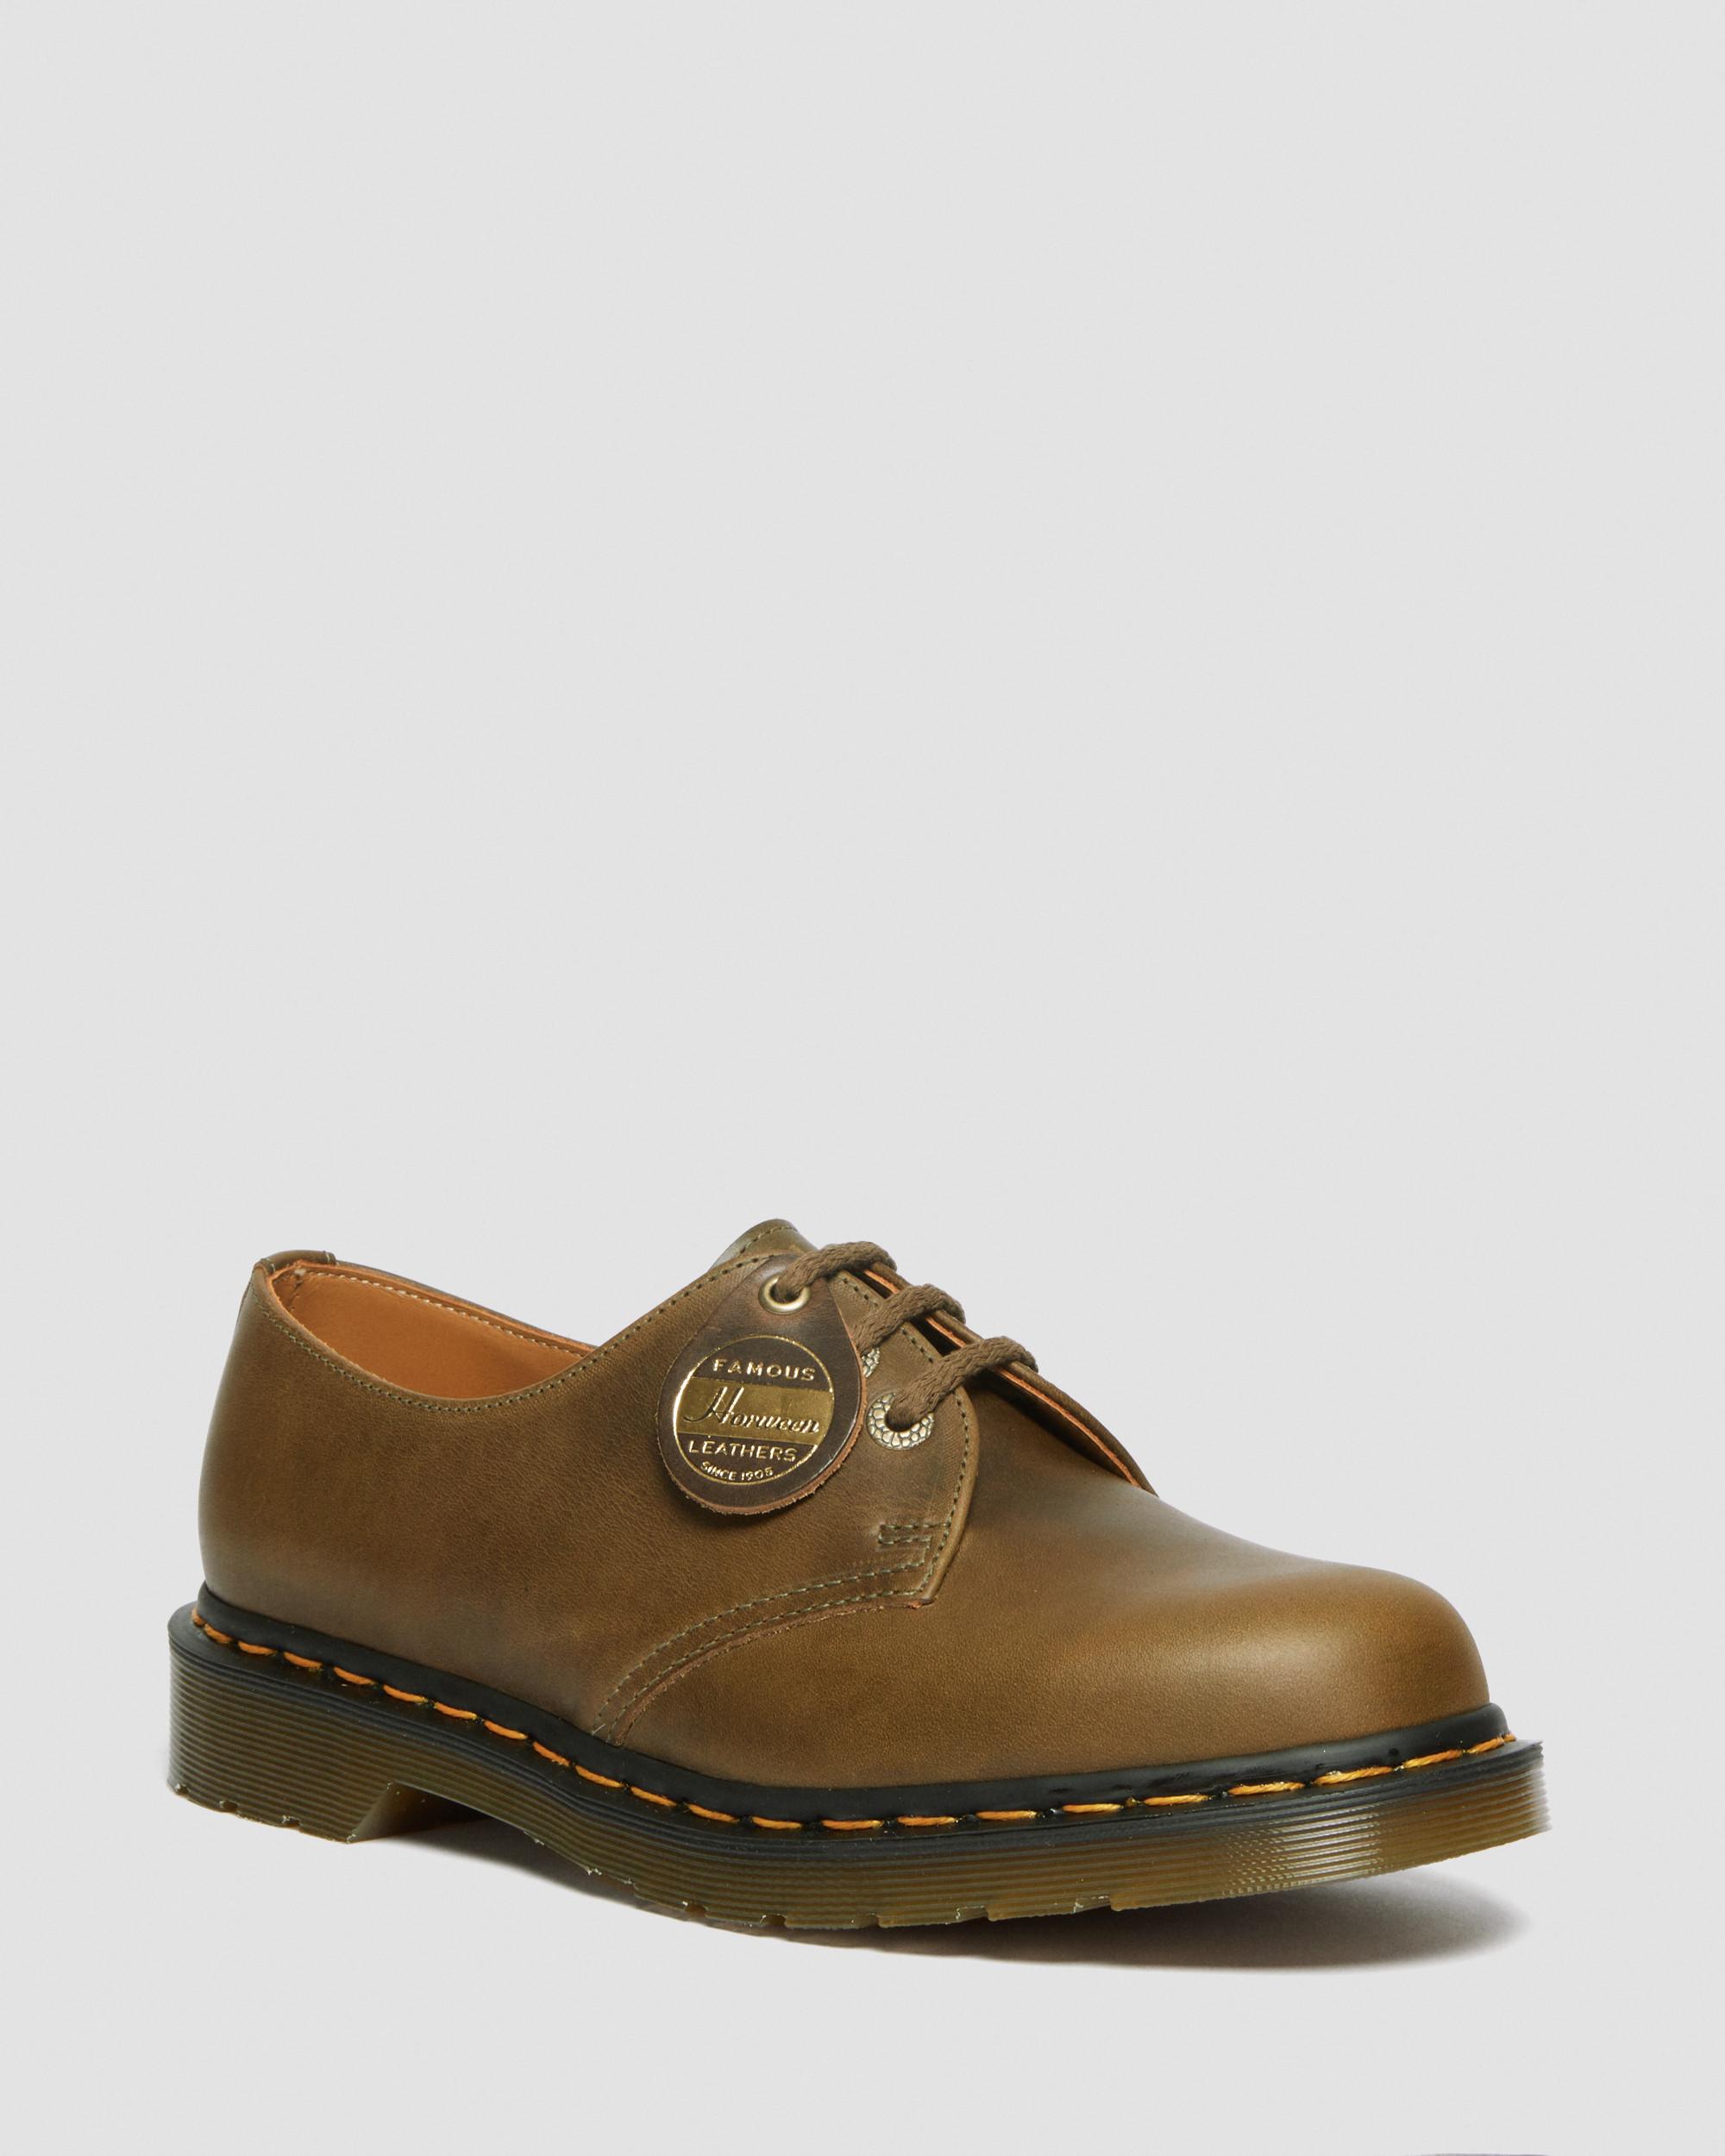 1461 Made in England Denver Leather Oxford Shoes in Olive | Dr